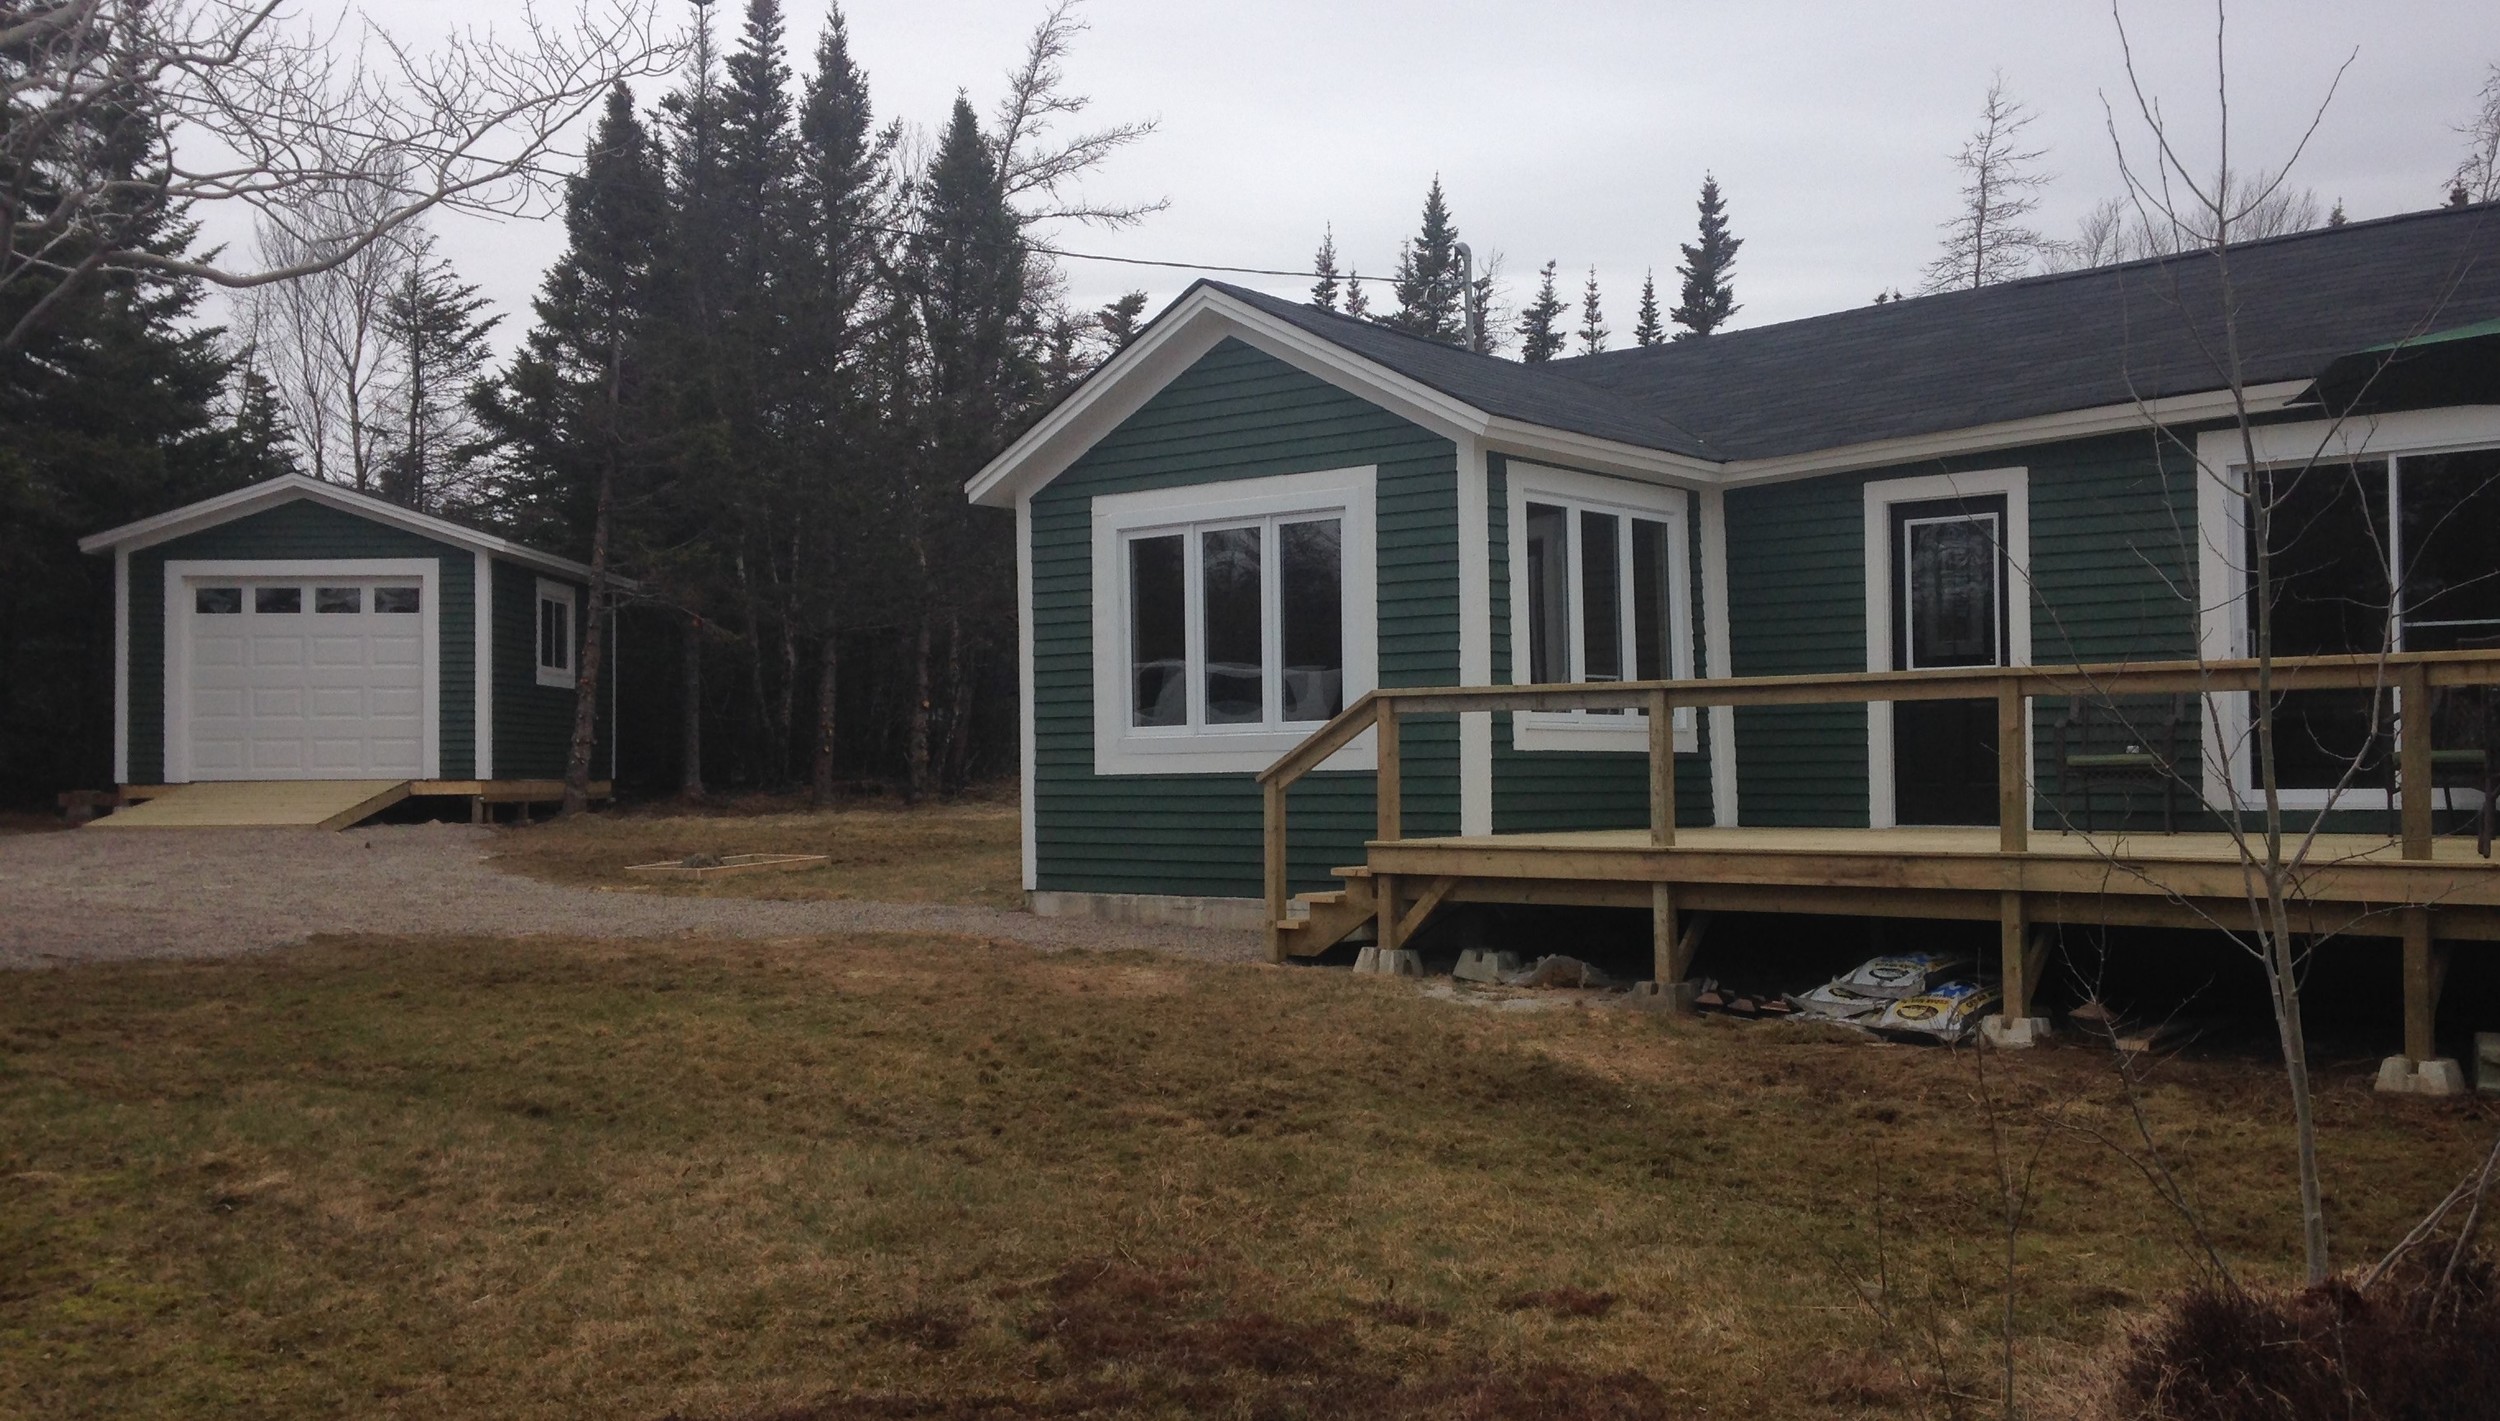 Wood siding and trims, new deck and shingles